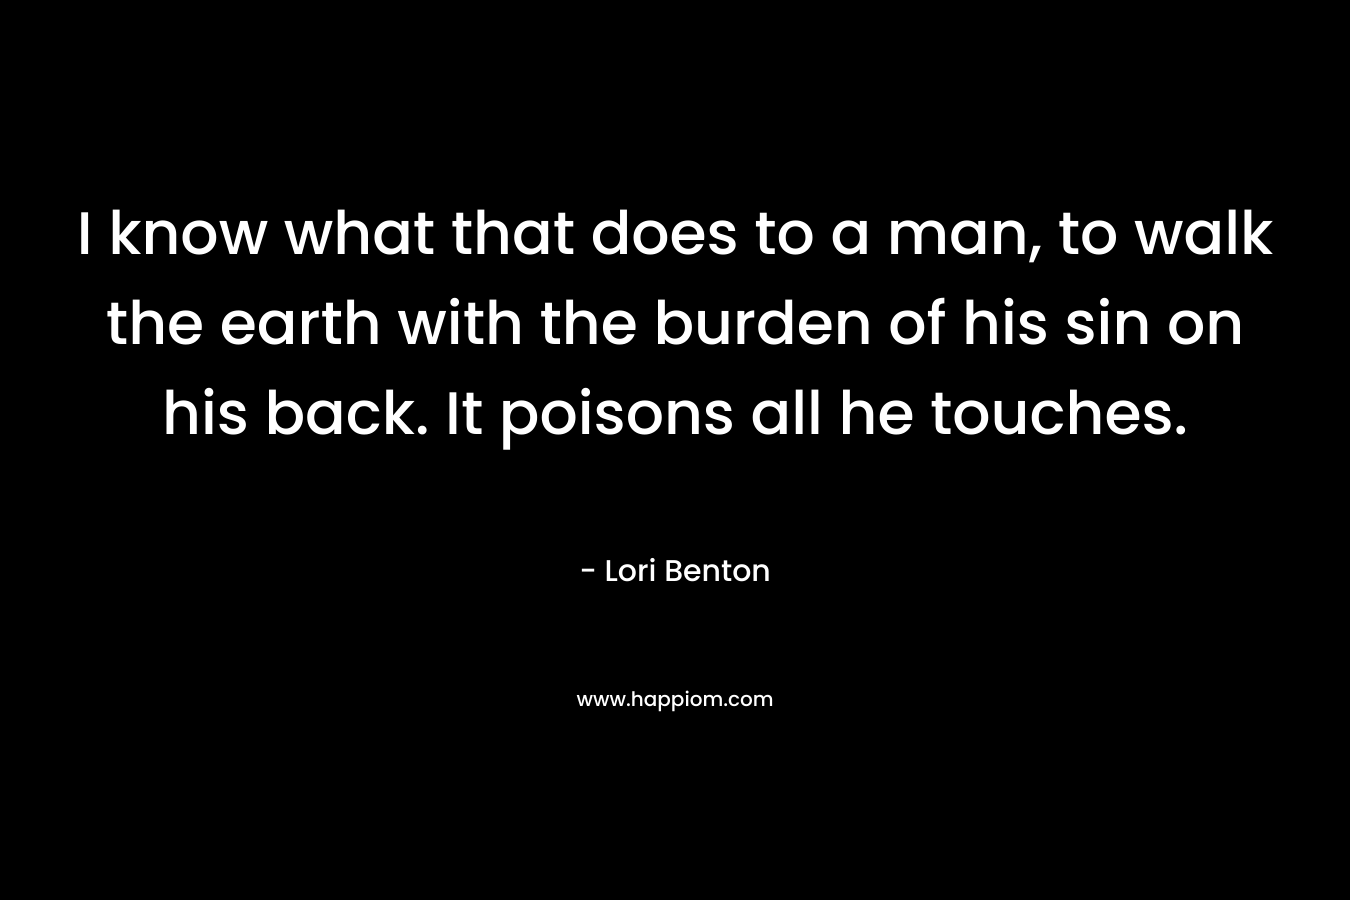 I know what that does to a man, to walk the earth with the burden of his sin on his back. It poisons all he touches.